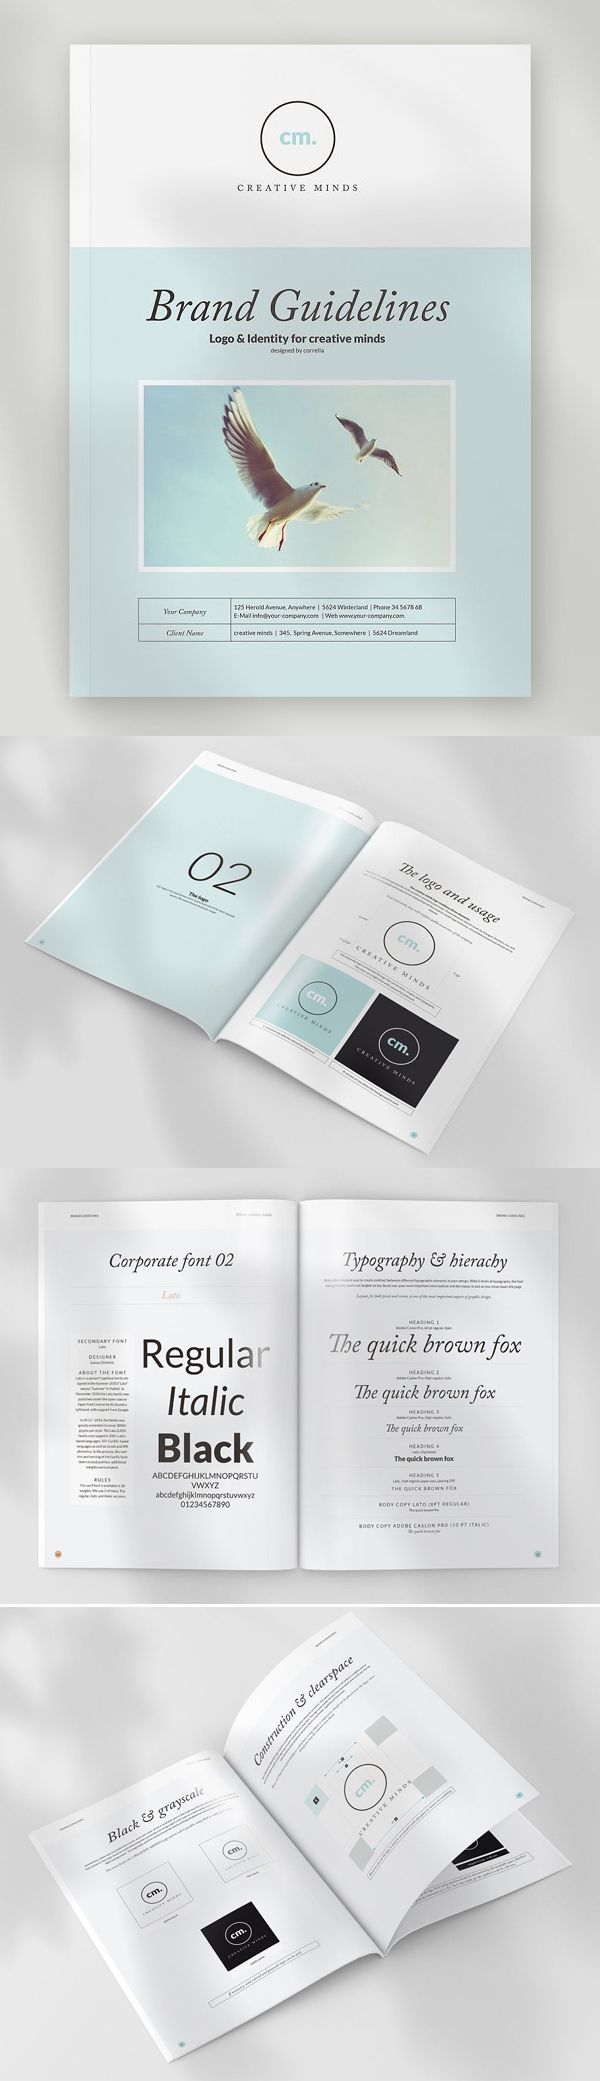 Brand and Design Guidelines InDesign Brochure Template